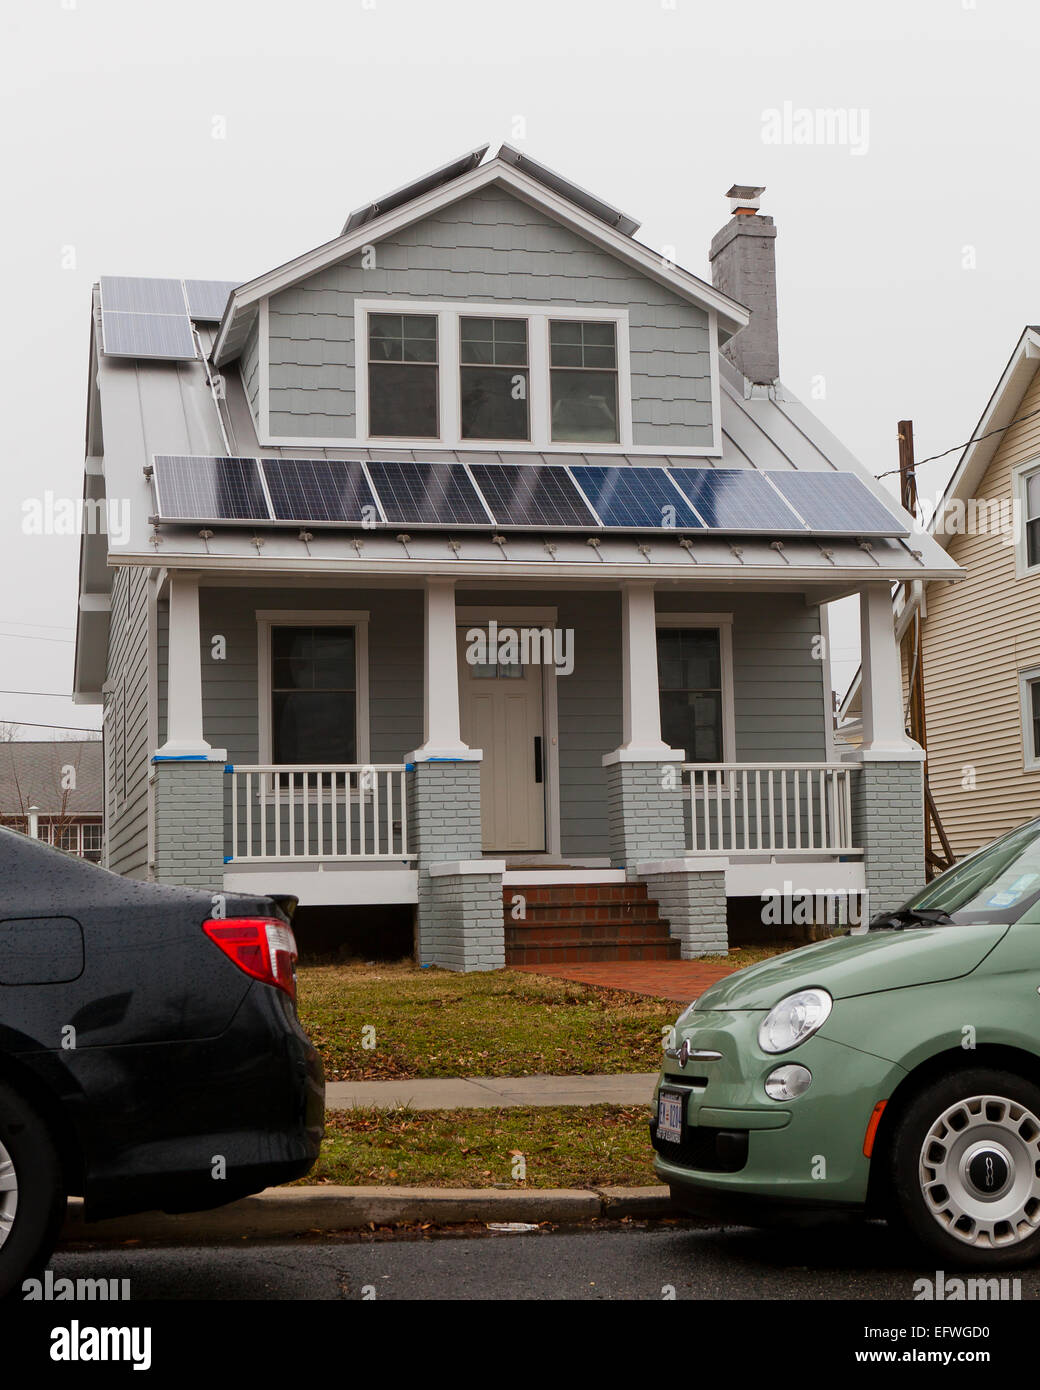 Solar panels on roof of small house - USA Stock Photo